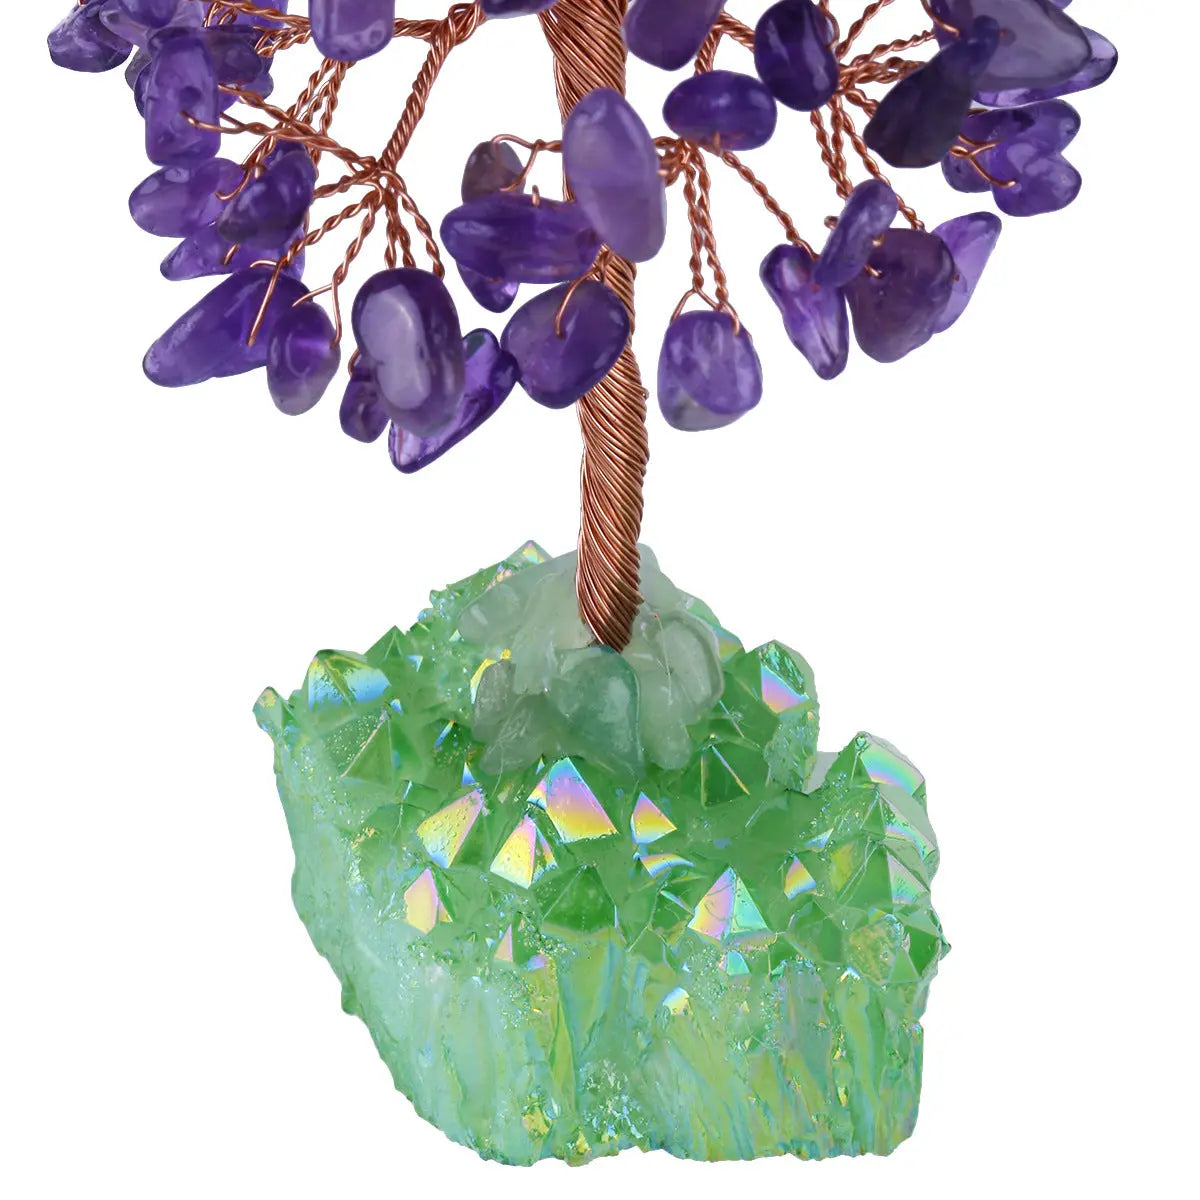 Amethyst Crystal Money Tree With Blue, Green, Pink & Red Aura Titanium Coated Quartz Cluster Base Bonsai Decoration for Wealth and Luck Healing Crystal Home